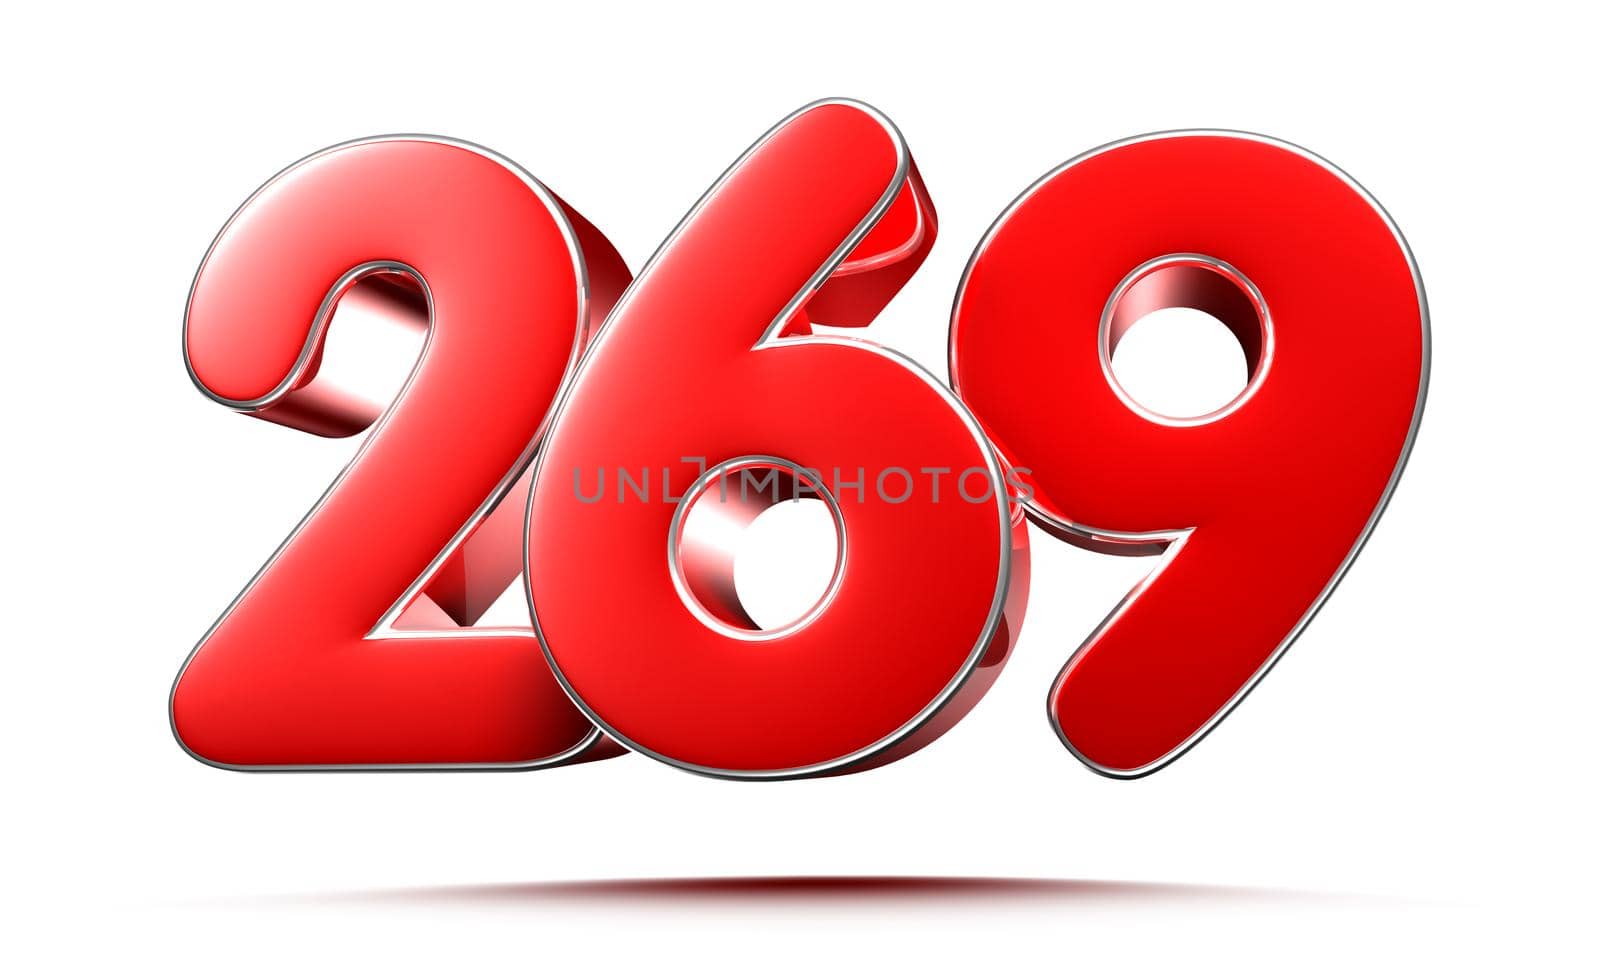 Rounded red numbers 269 on white background 3D illustration with clipping path